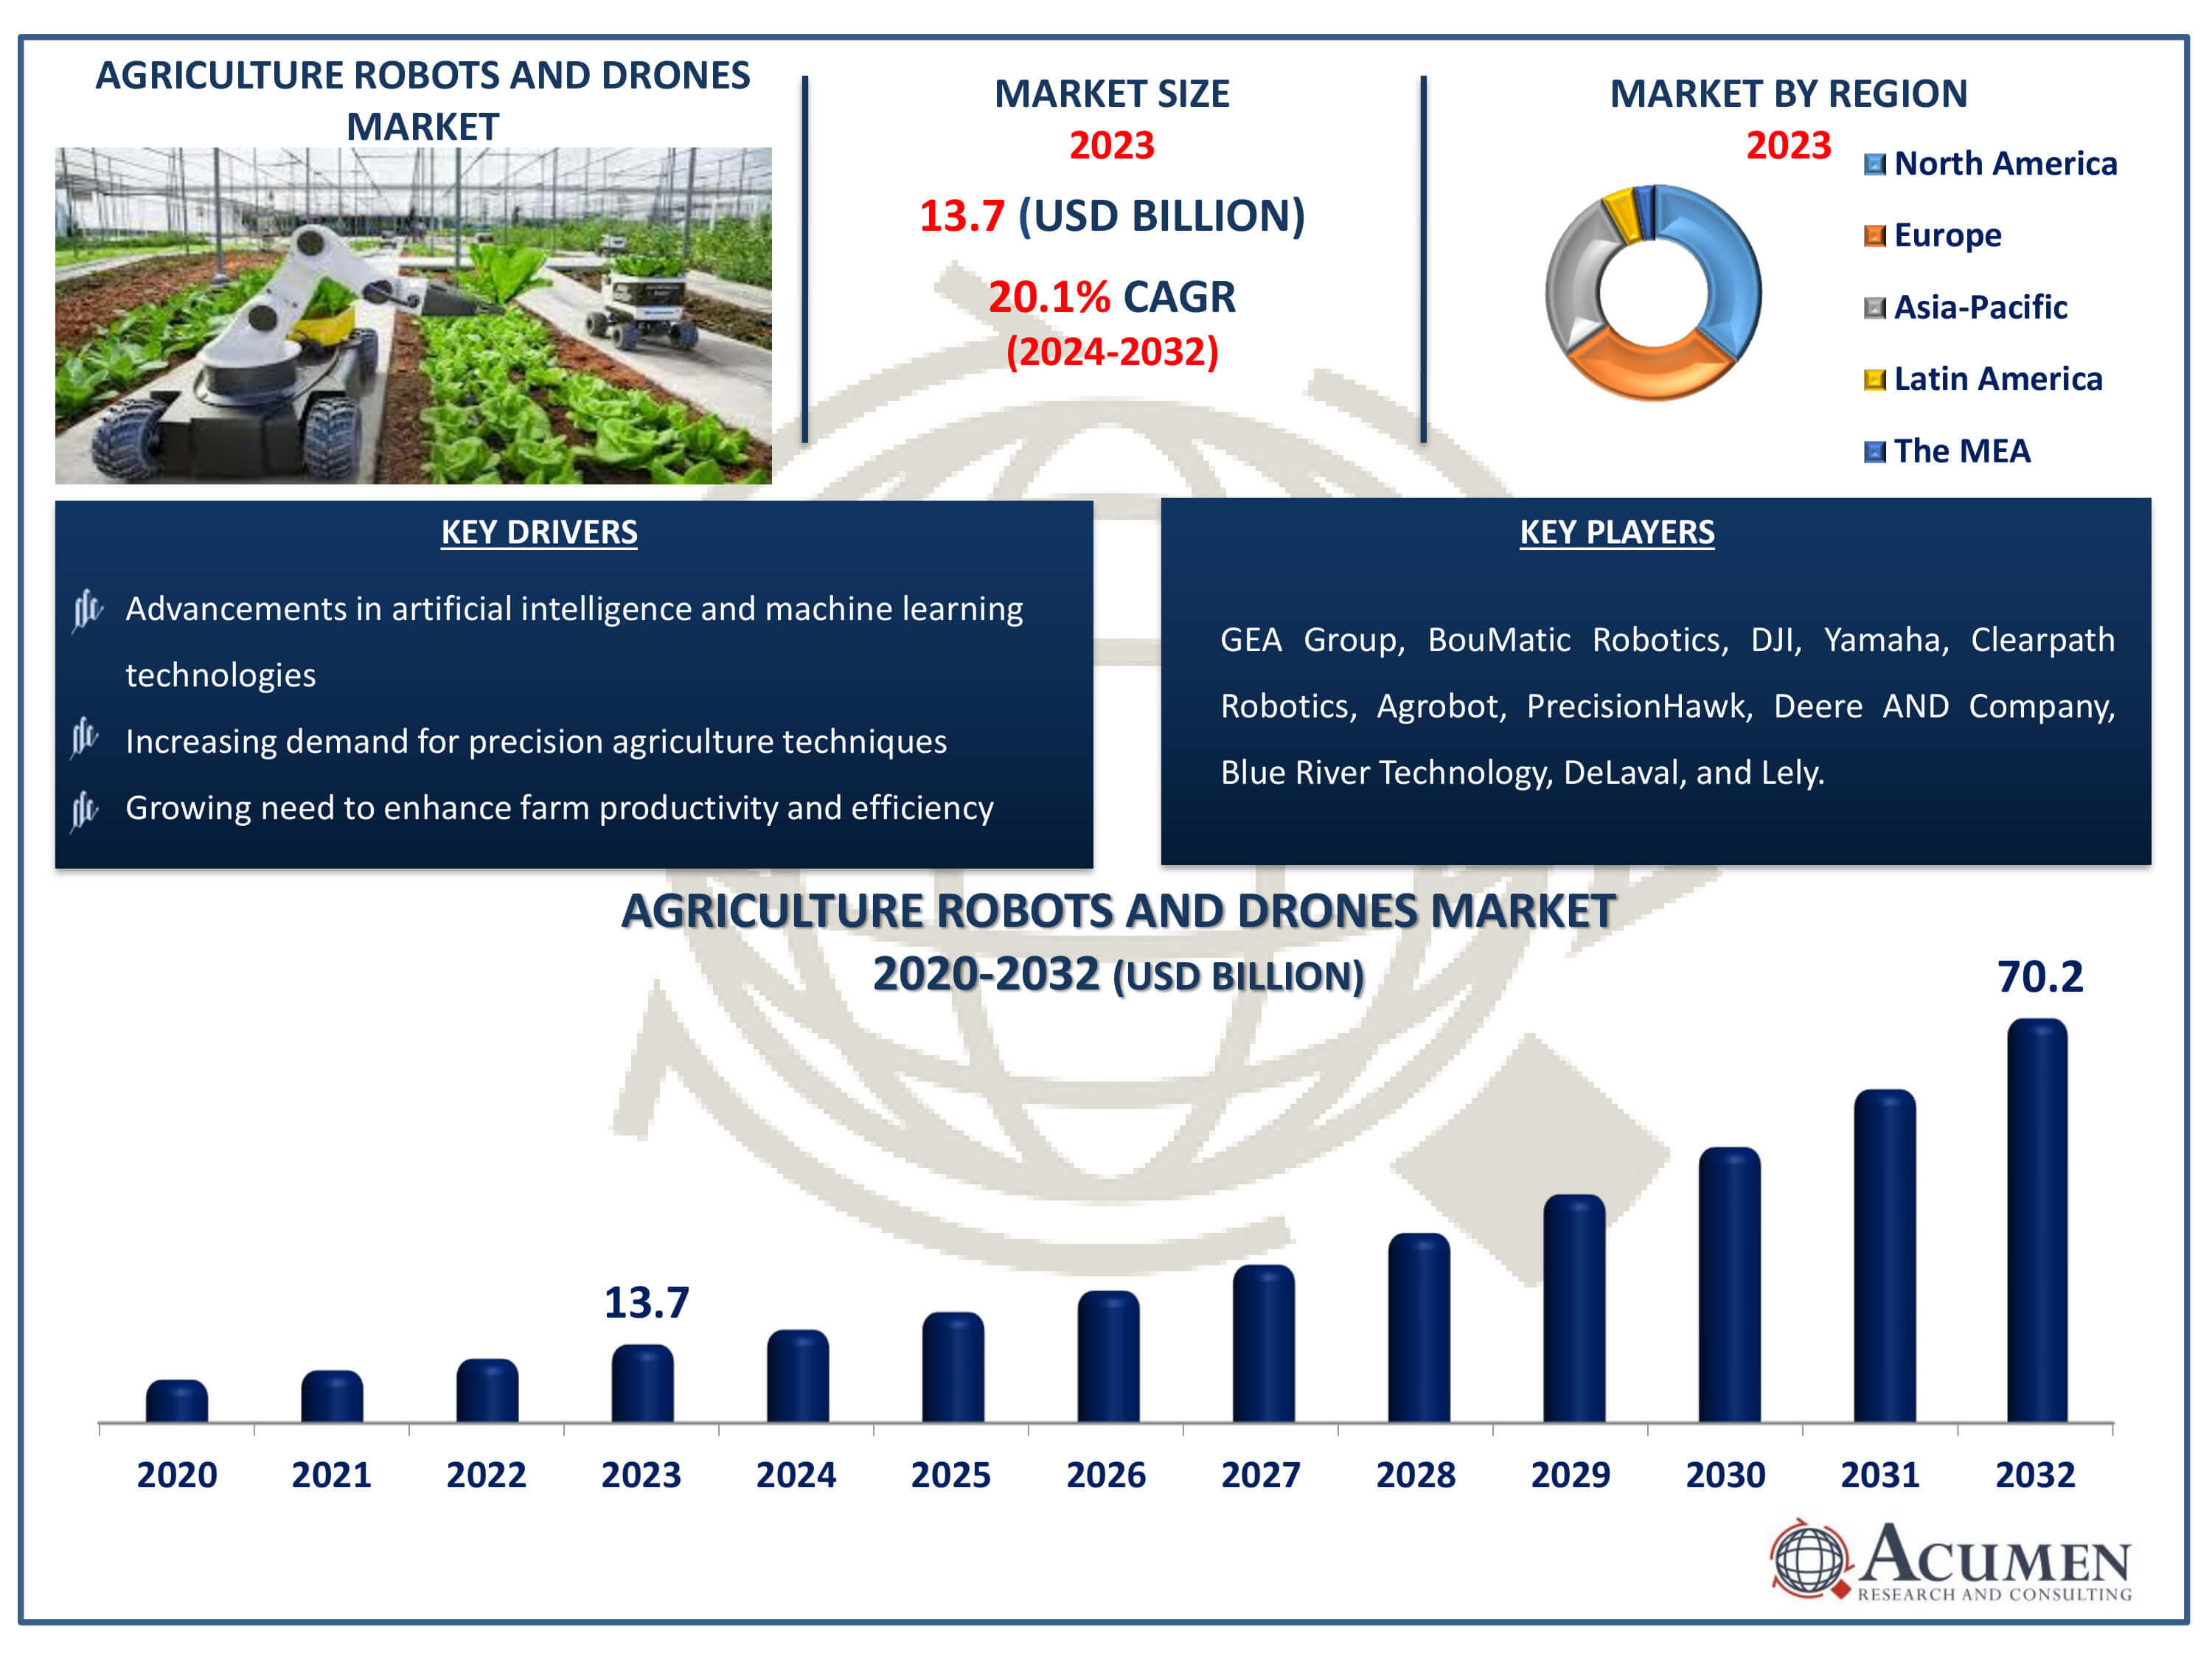 Agriculture Robots and Drones Market Dynamics